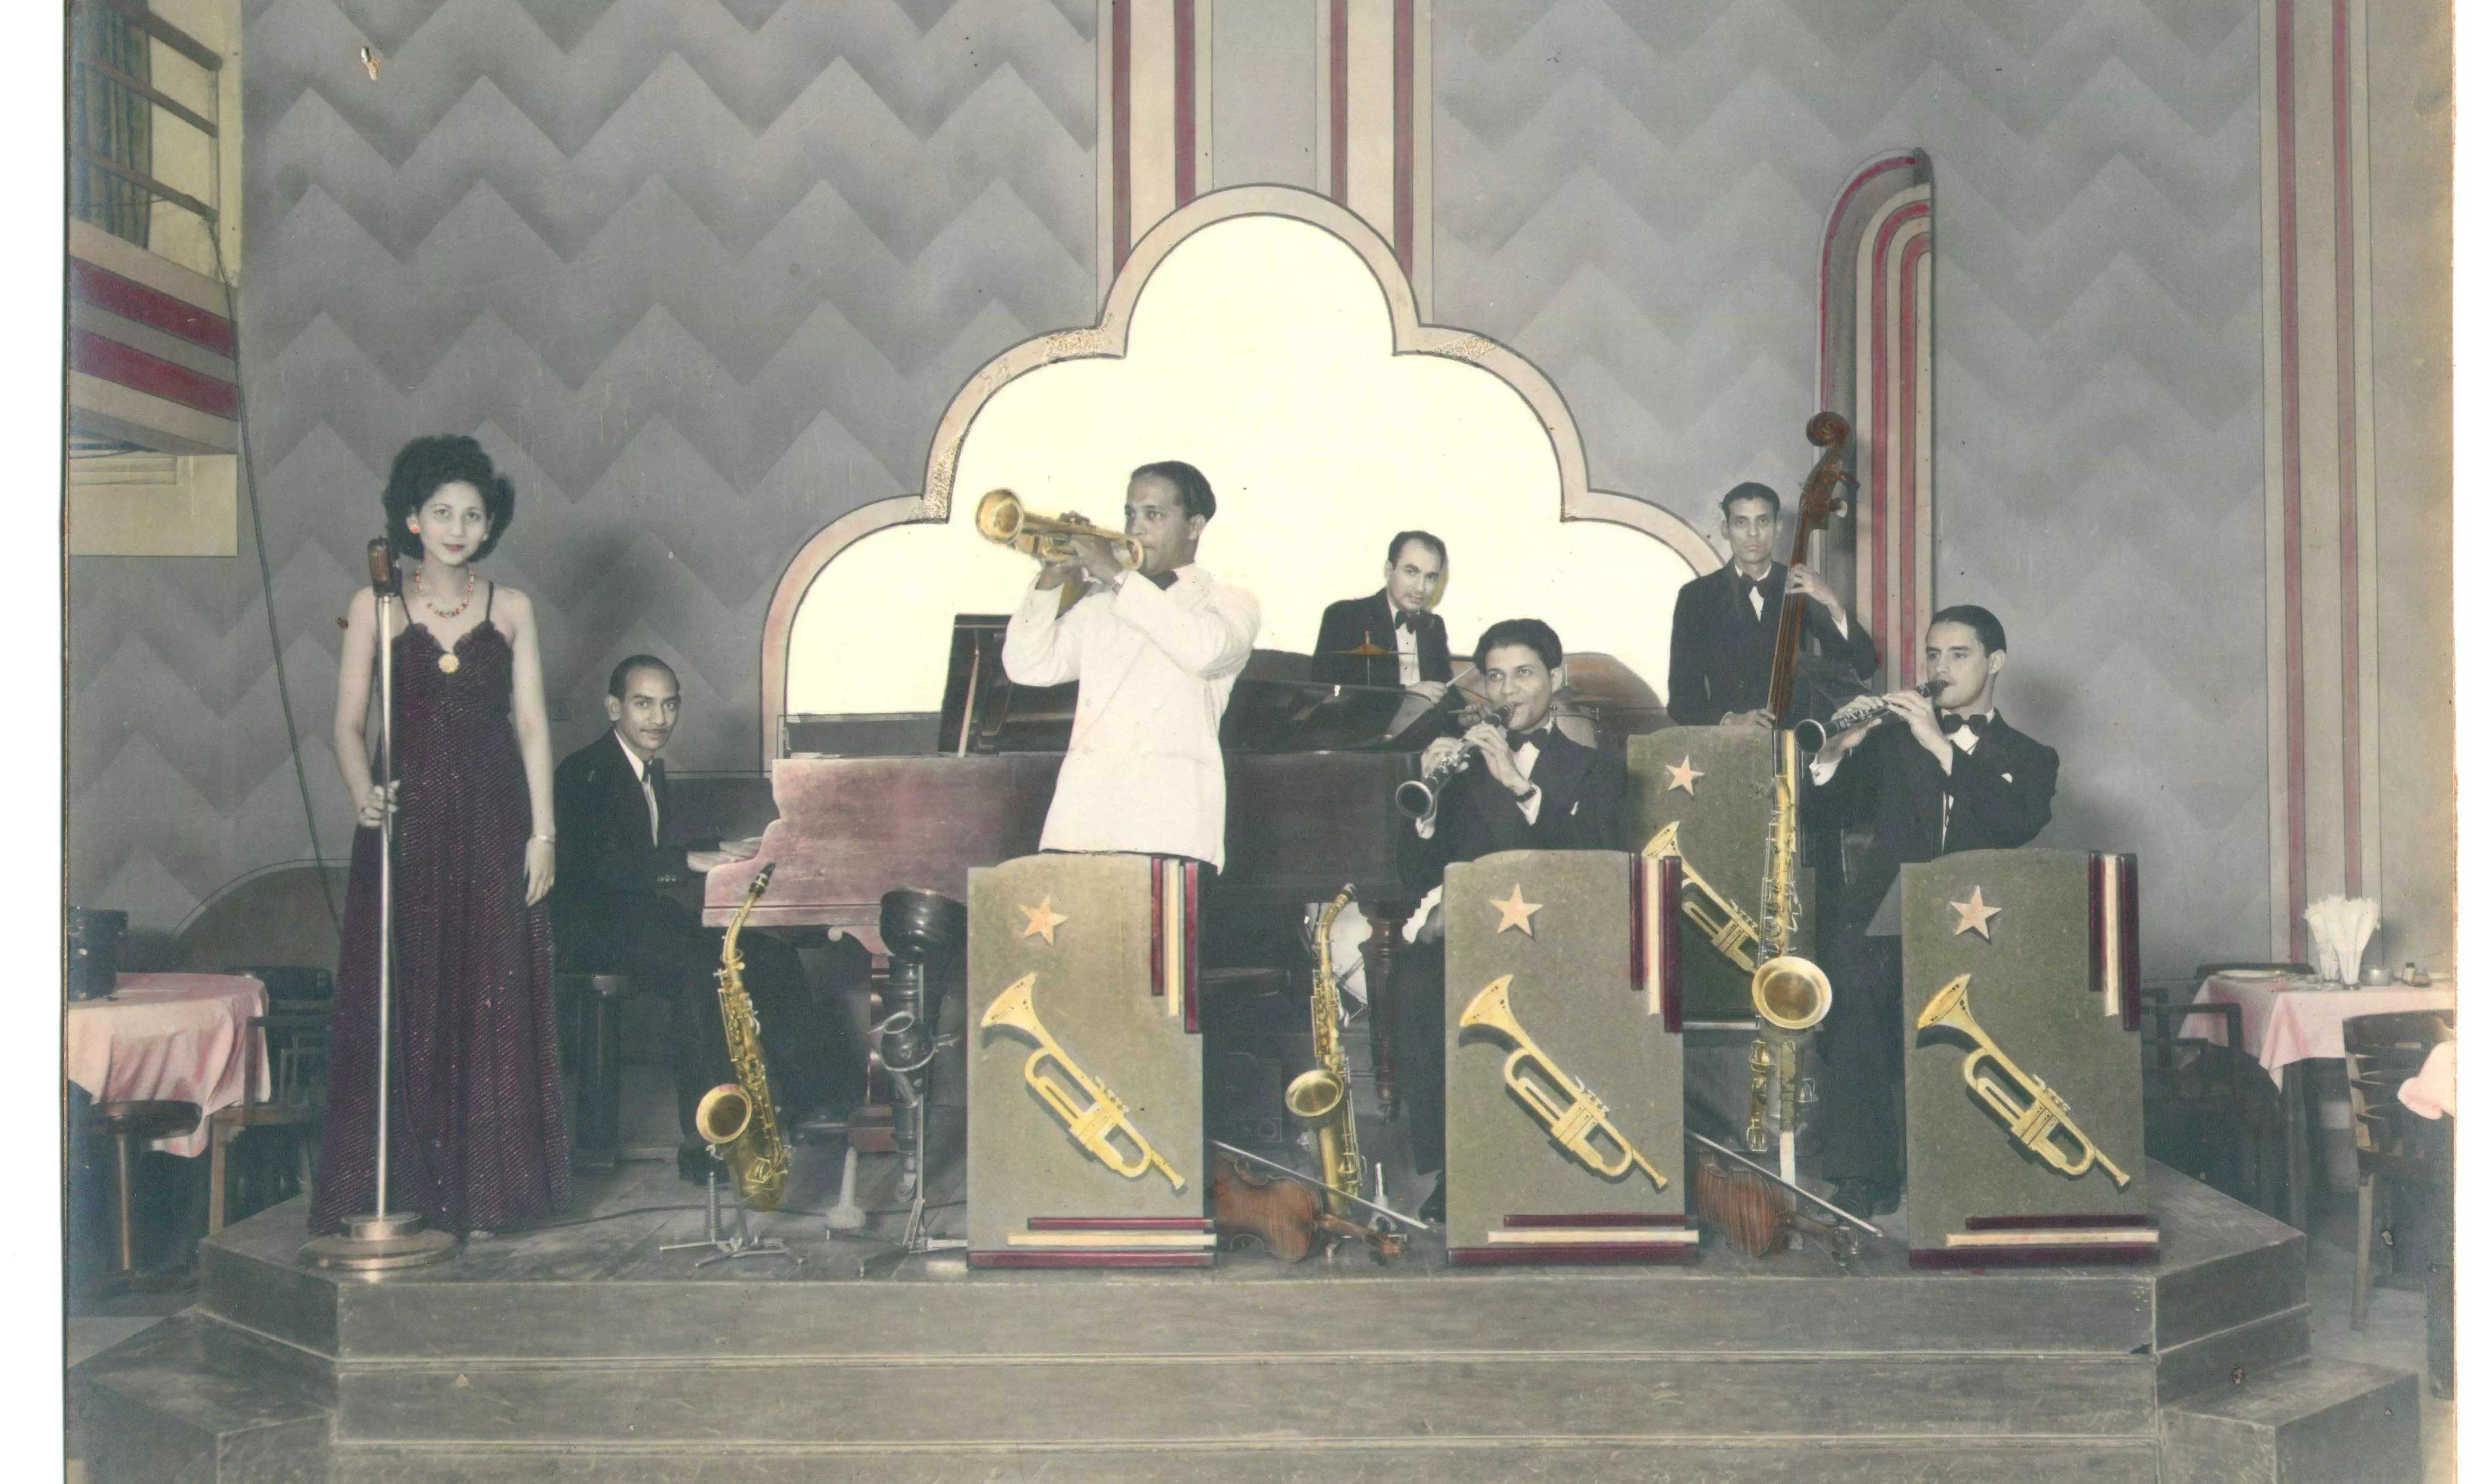 From New Orleans to Bombay: The Journey of Jazz in India